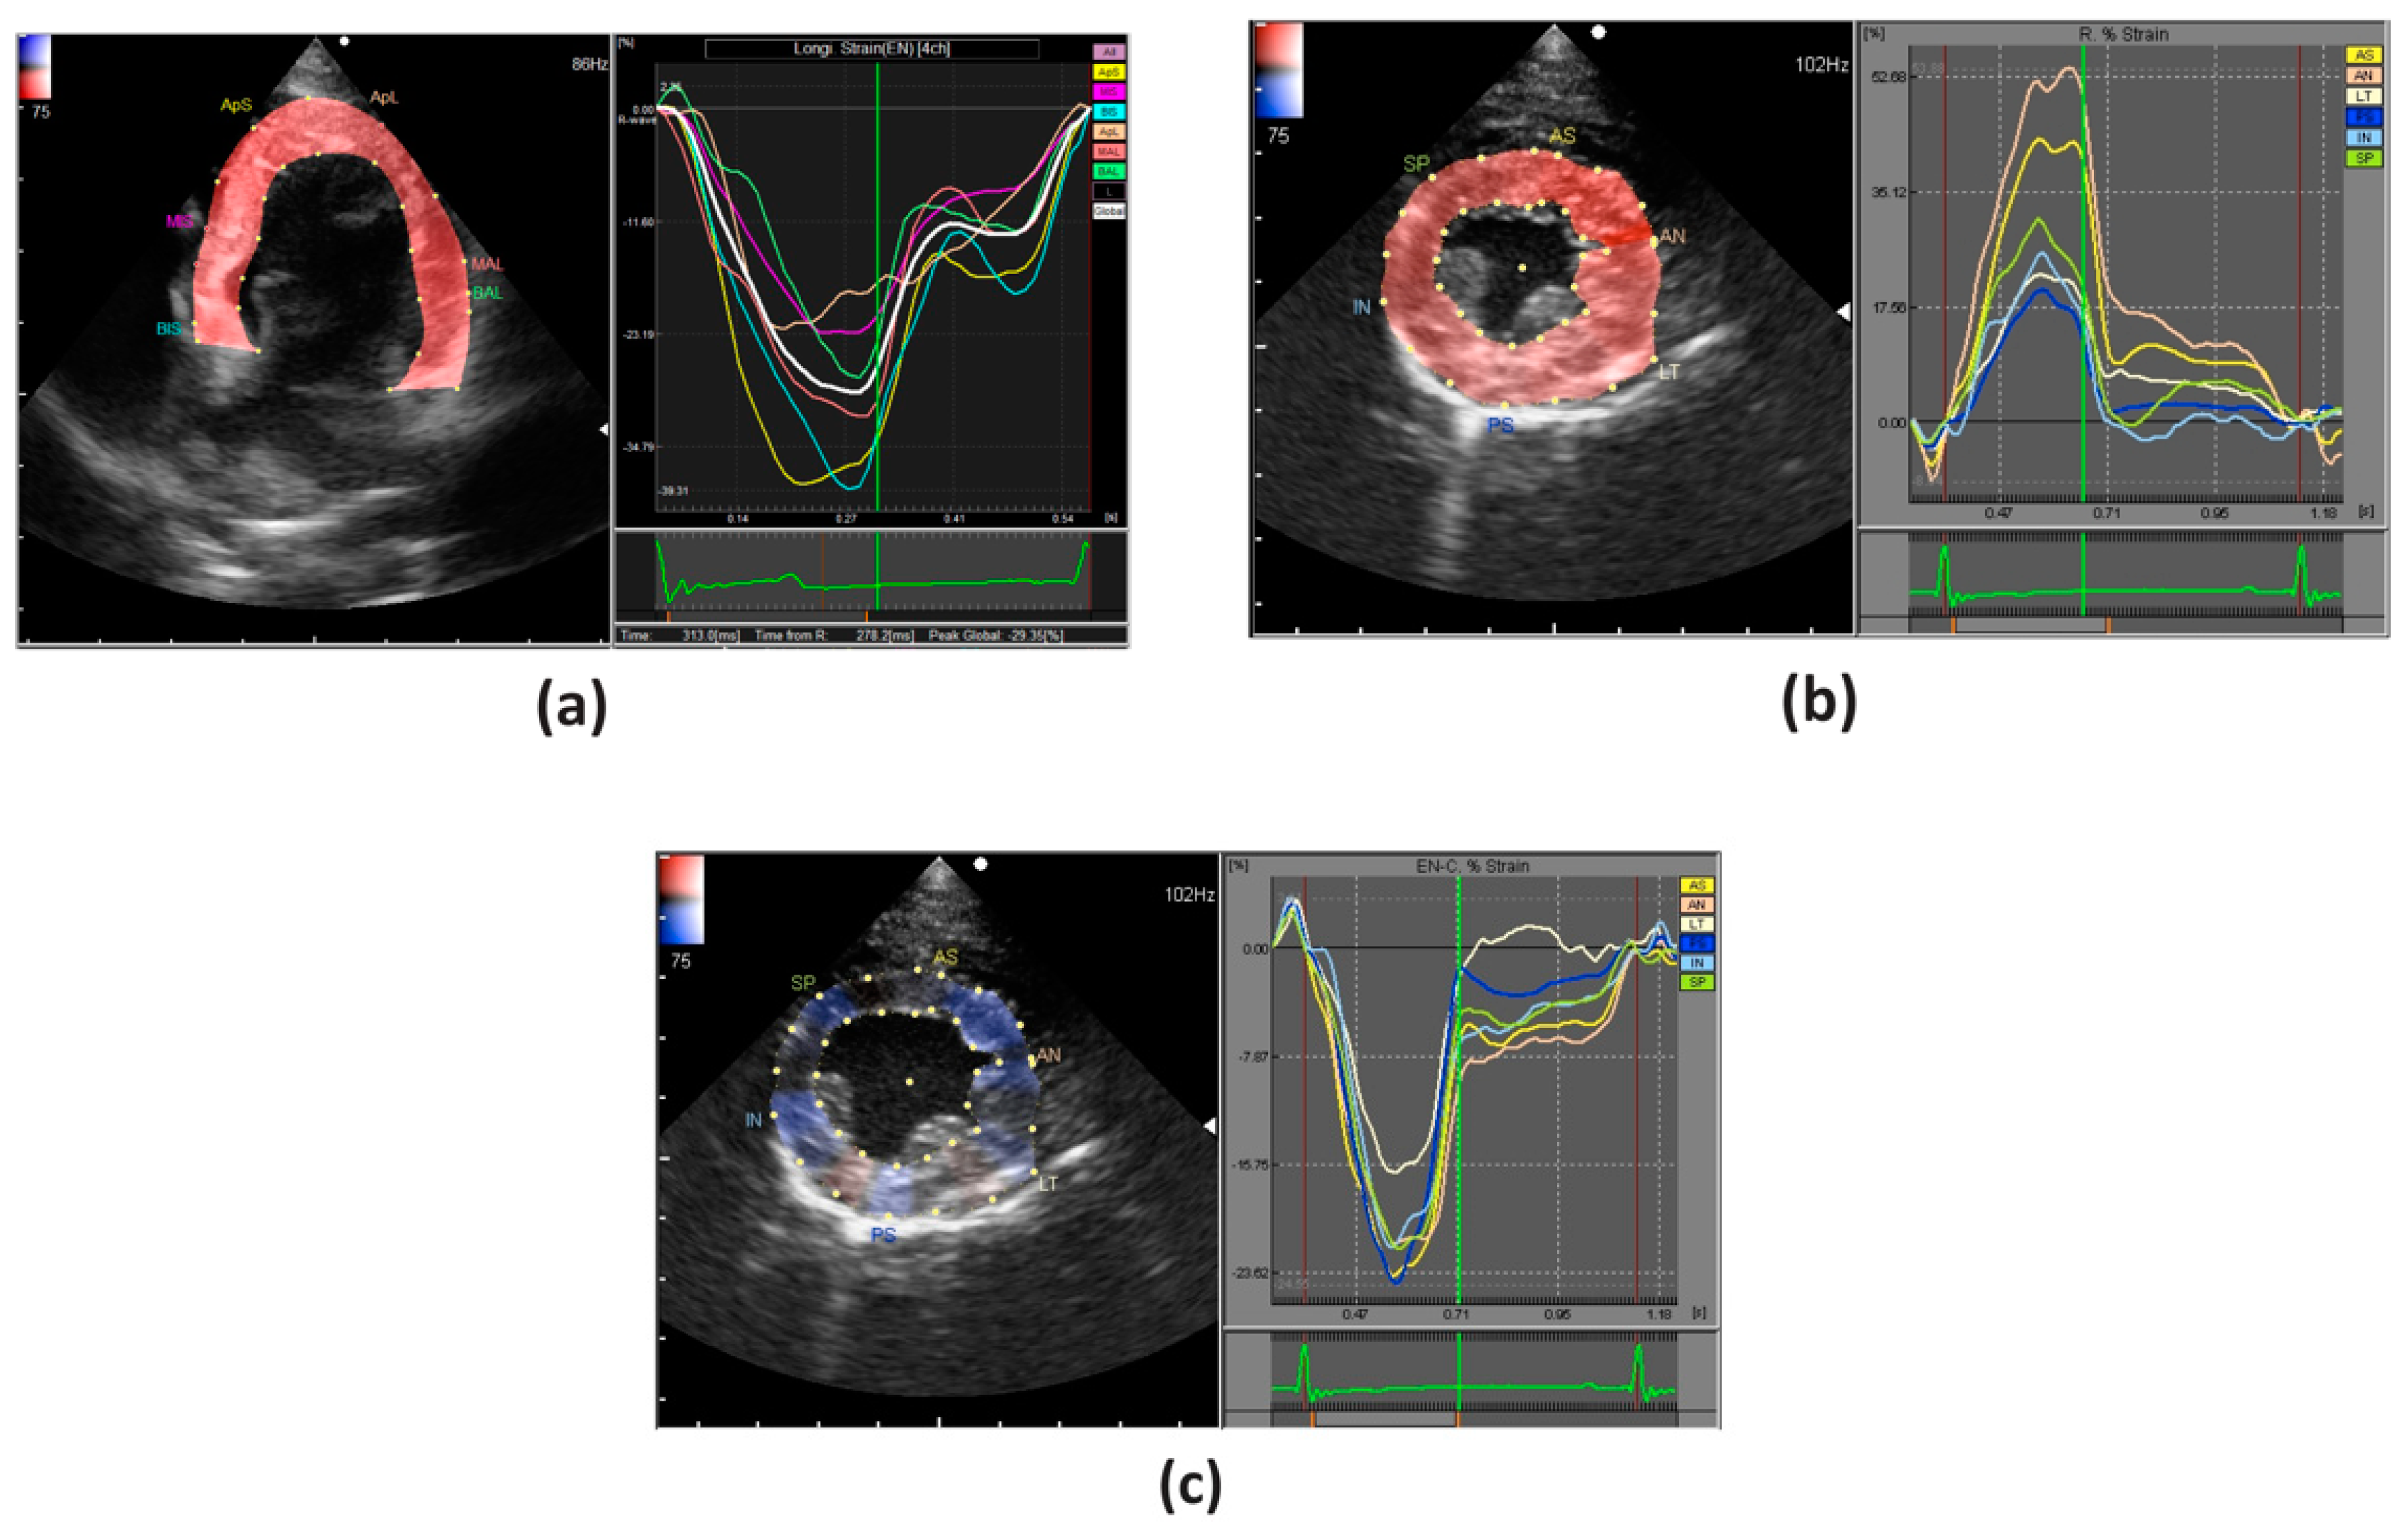 Speckle Tracking Echocardiography: Early Predictor of Diagnosis